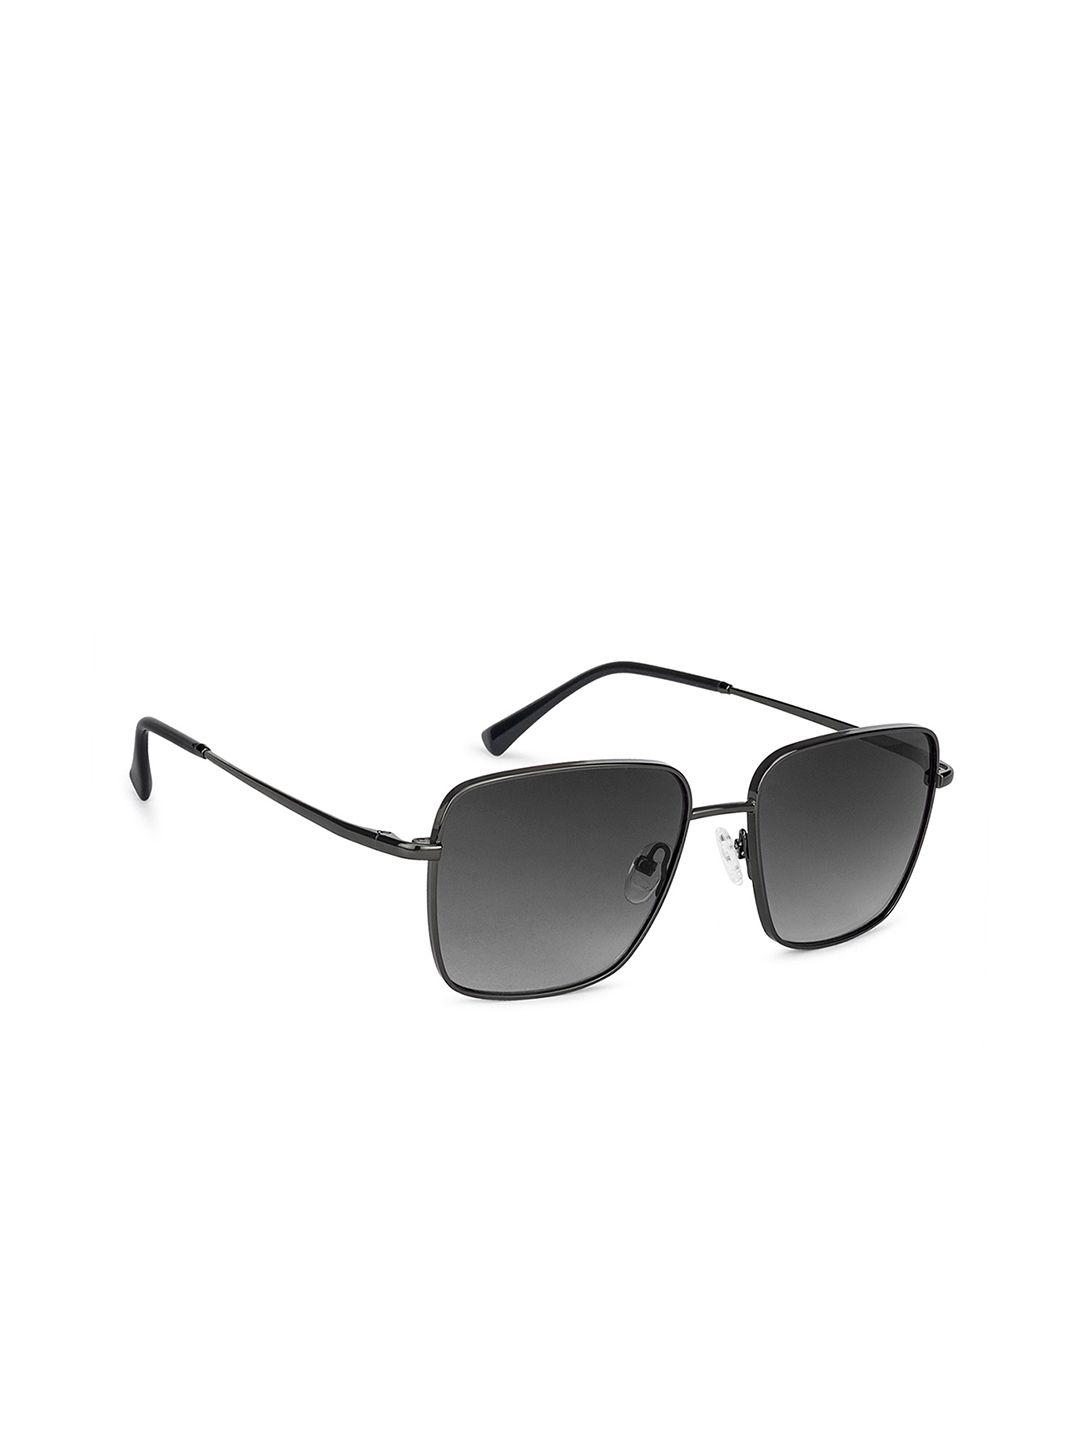 john jacobs unisex grey lens & black square sunglasses with uv protected lens